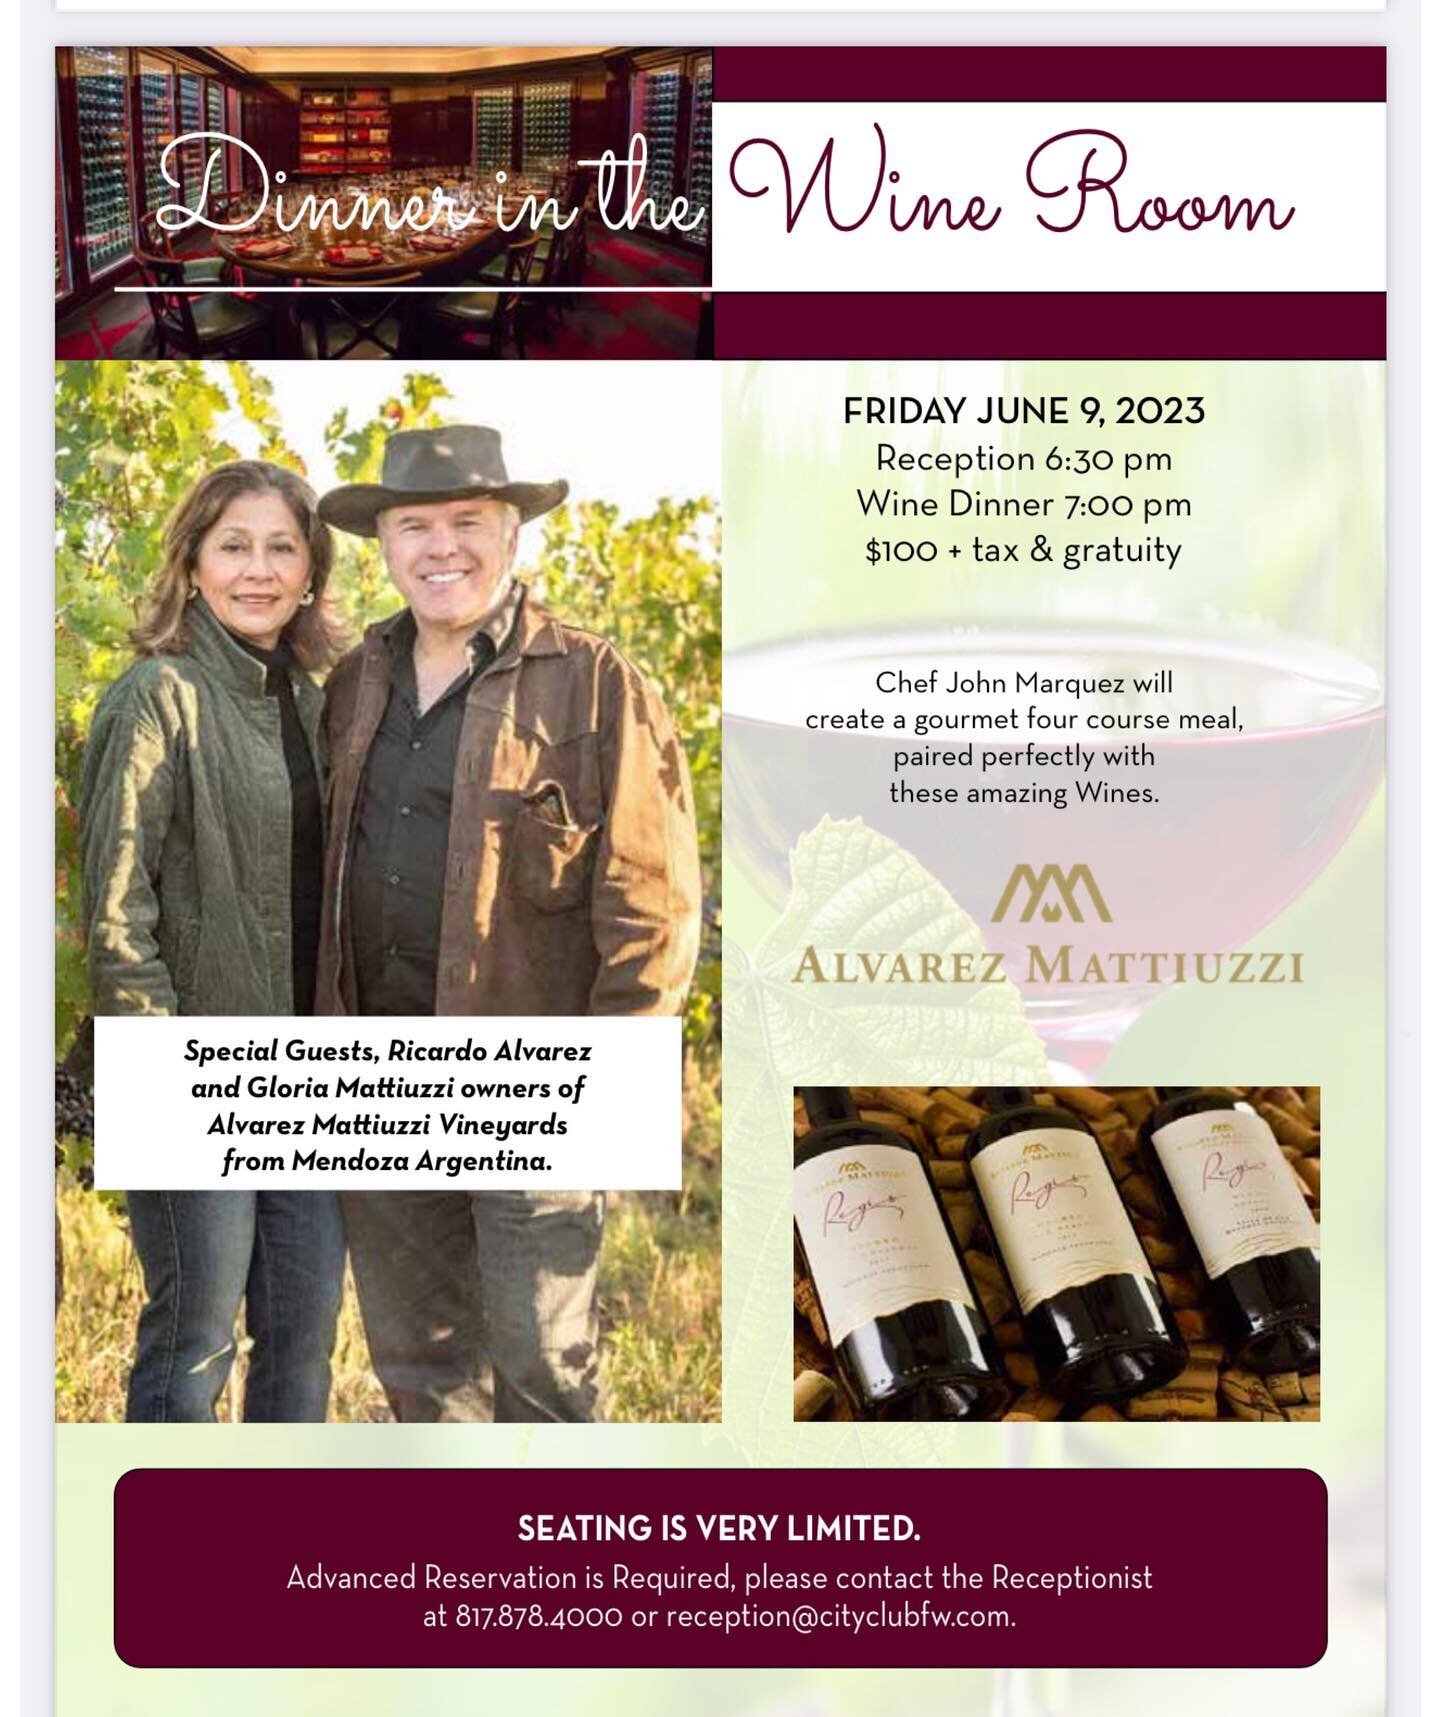 You are invited to our Dinner in the Wine Room  @cityclubftw on Friday, June 9! Chef John Marquez will create a gourmet four-course meal paired with our wines. 🍷

Reception 6:30 pm
Wine Dinner 7:00 pm
$100 + tax &amp; gratuity
.
.
.
#winedinnerserie